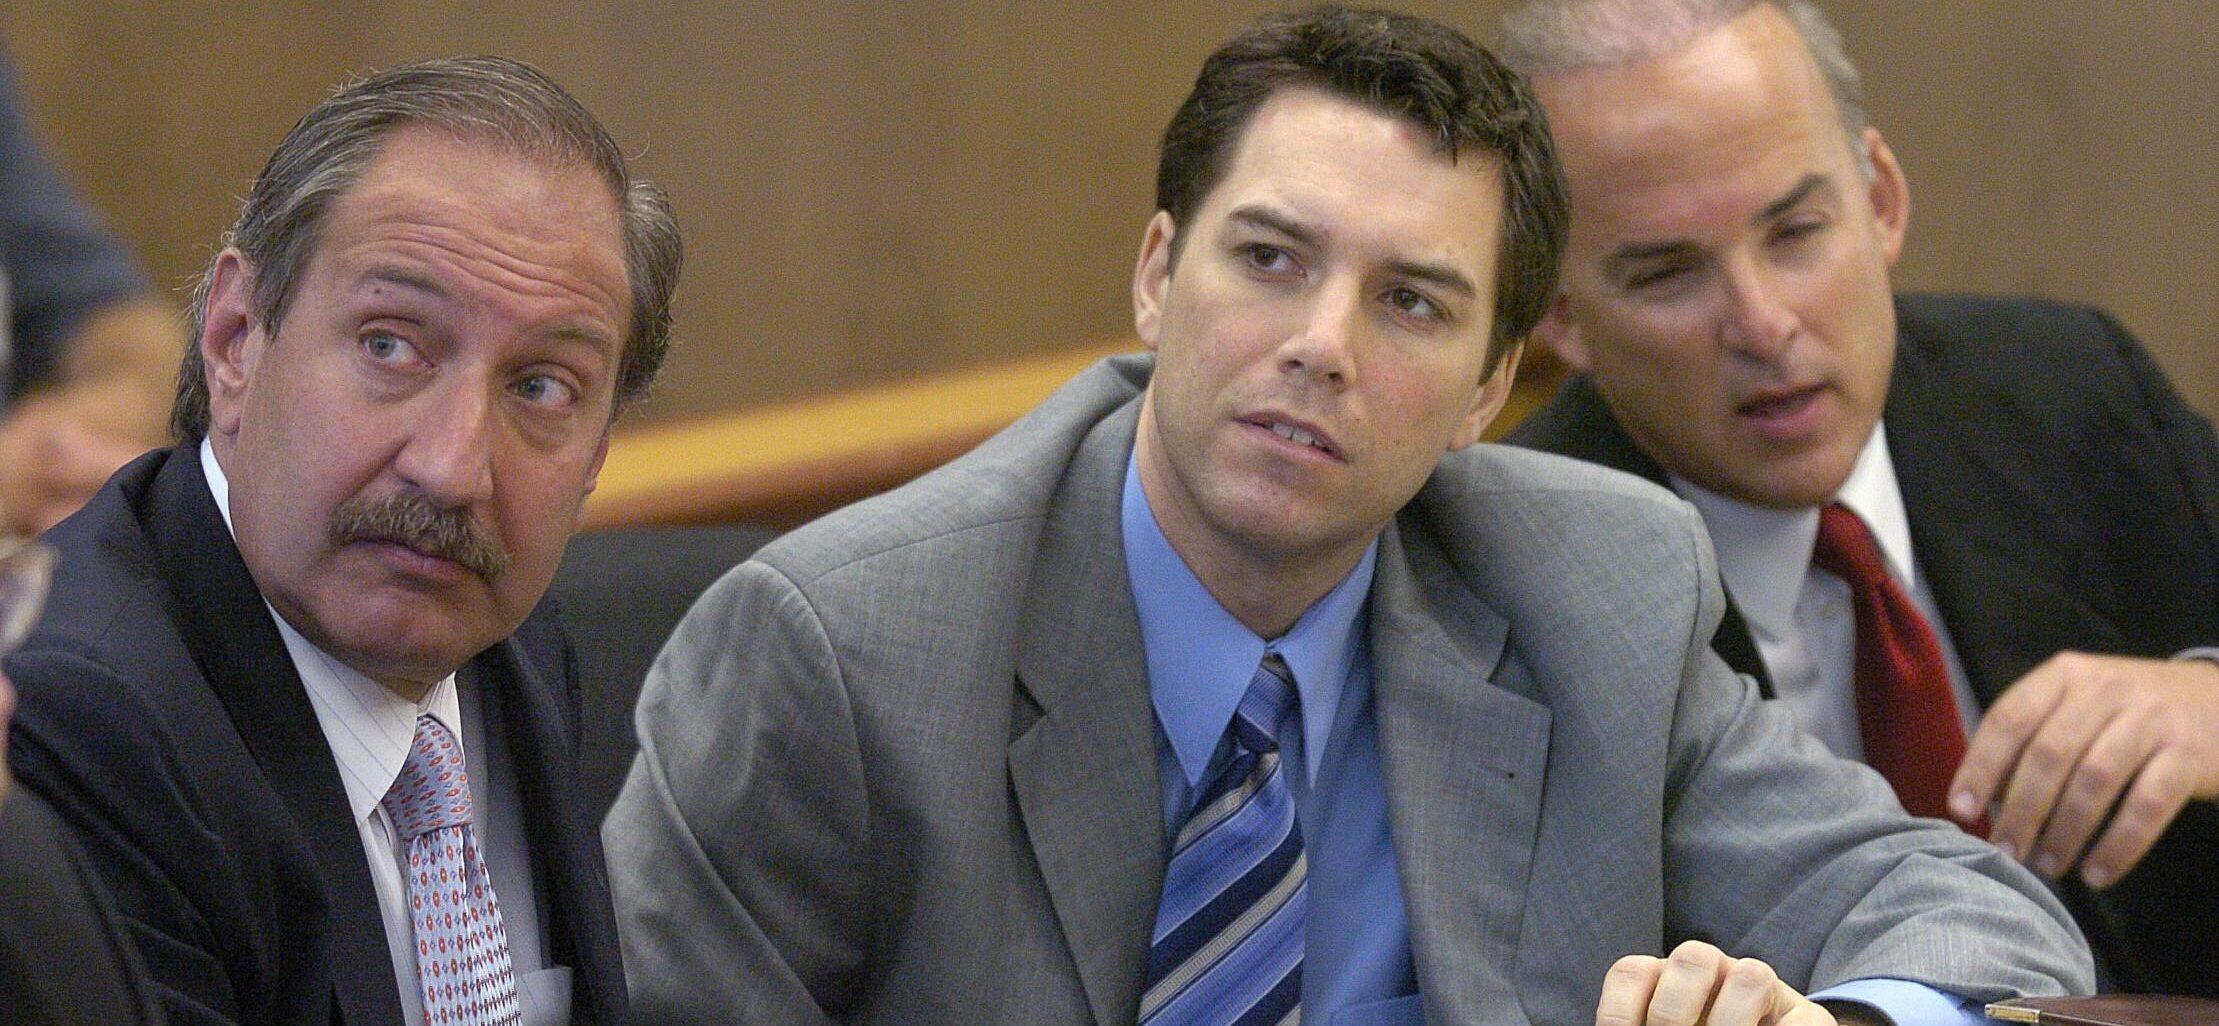 Scott Peterson Angrily Confronted By Laci’s Mother: You Ended Two Beautiful Souls!